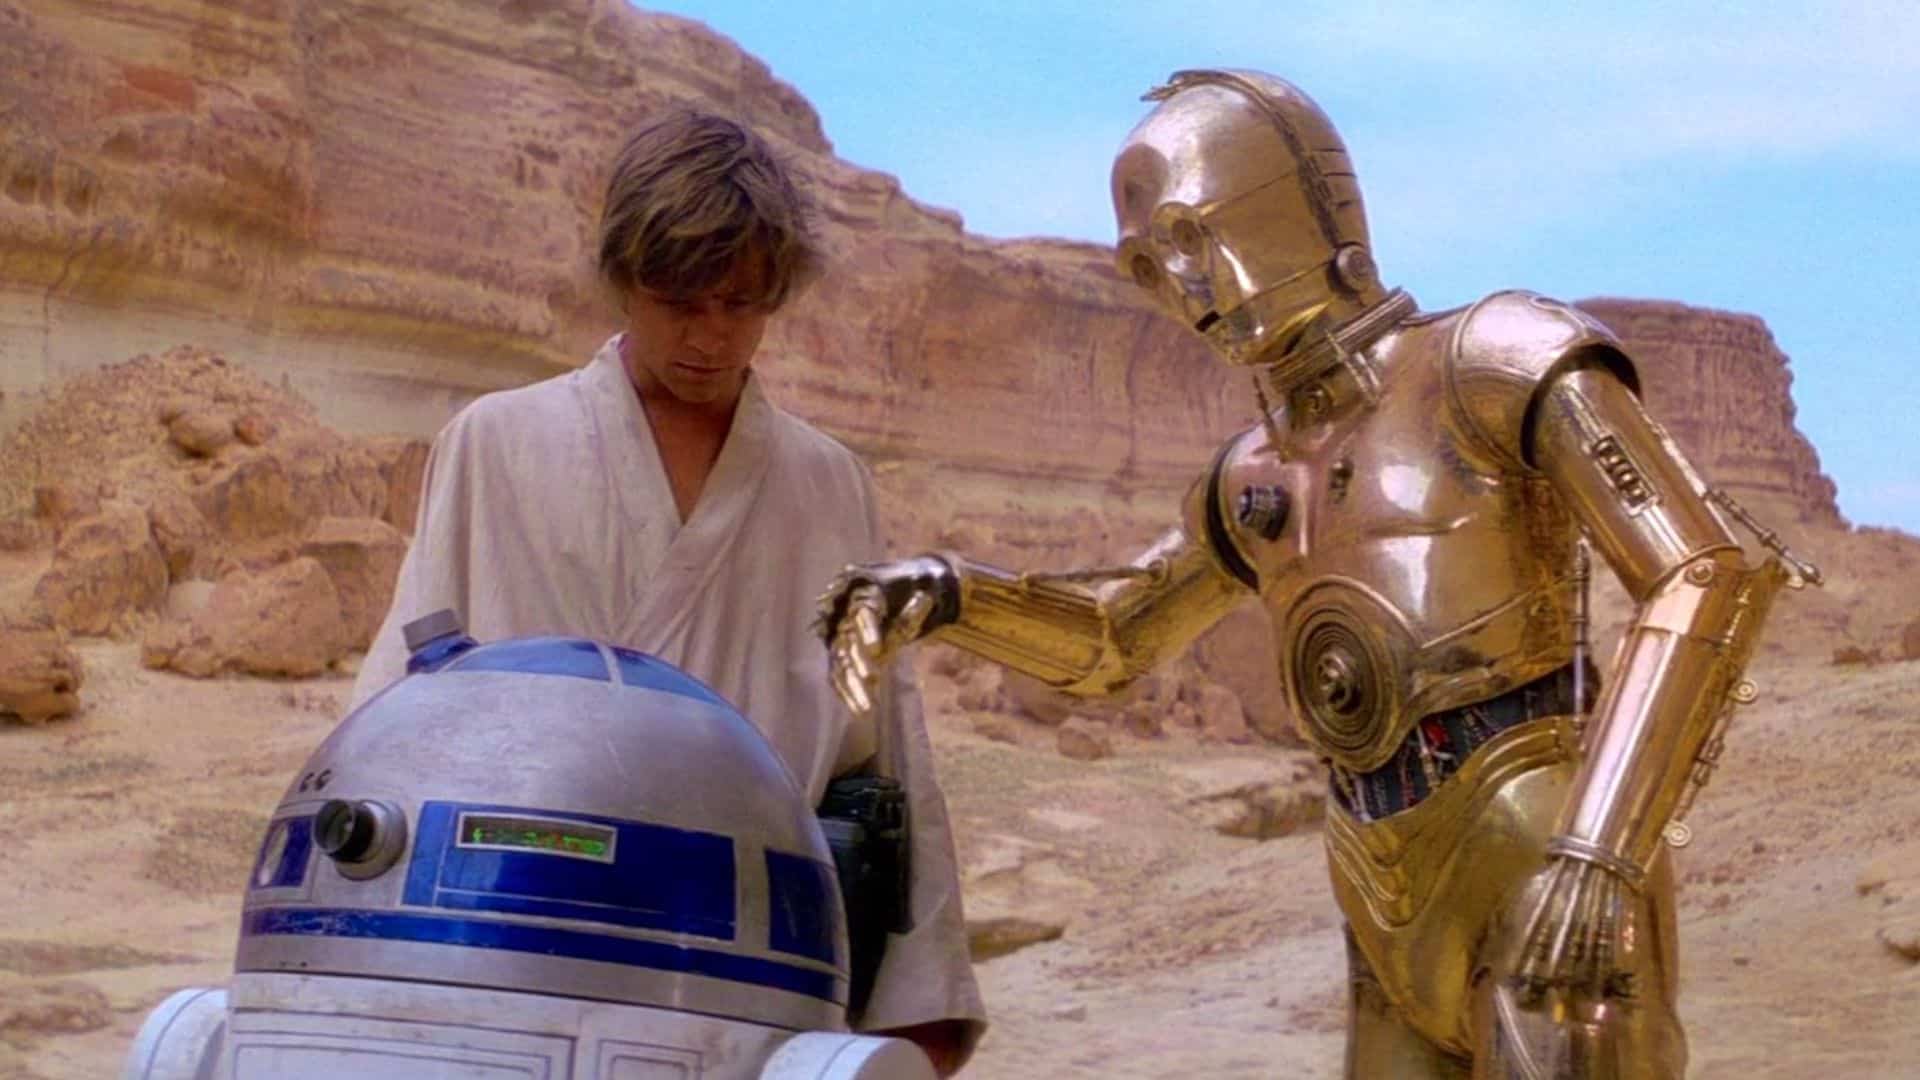 R2-D2, Luke Skywalker, and C-3PO stand in the desert in this image from Lucasfilm.